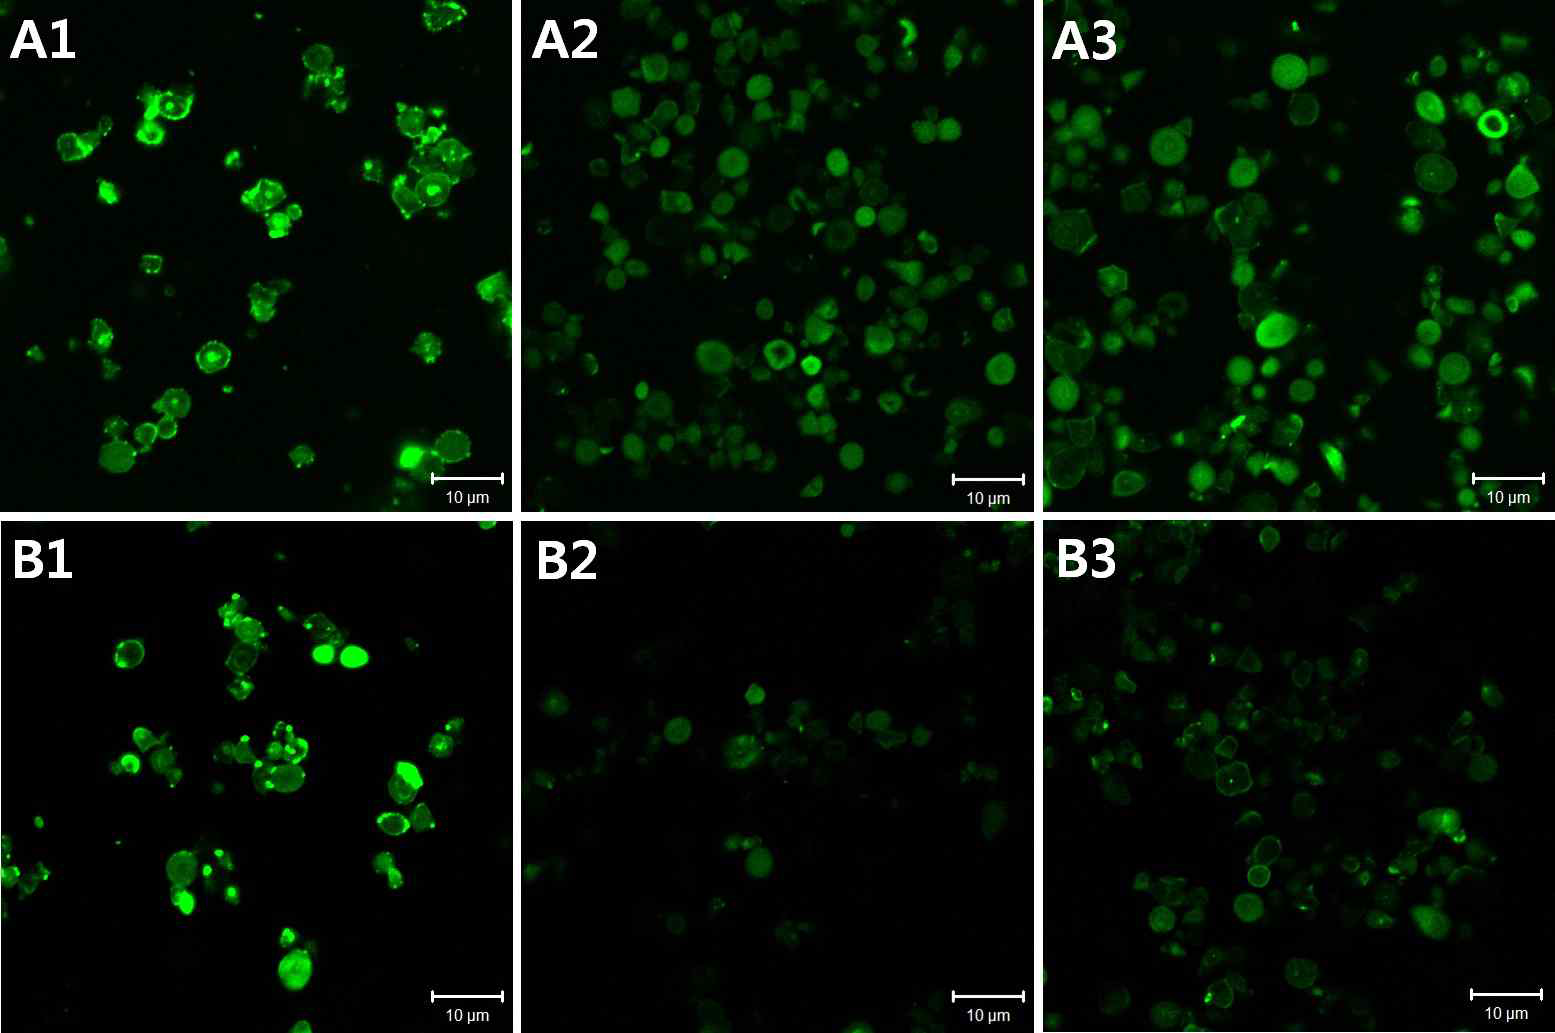 CLSM images of native (A1 & B1), pronase-treated (A2 & B2), and protease K-treated (A3 & B3) starches from normal (A1-A3) and waxy (B1-B3) rice, labeled with CBQCA (scale bar=10 μm)